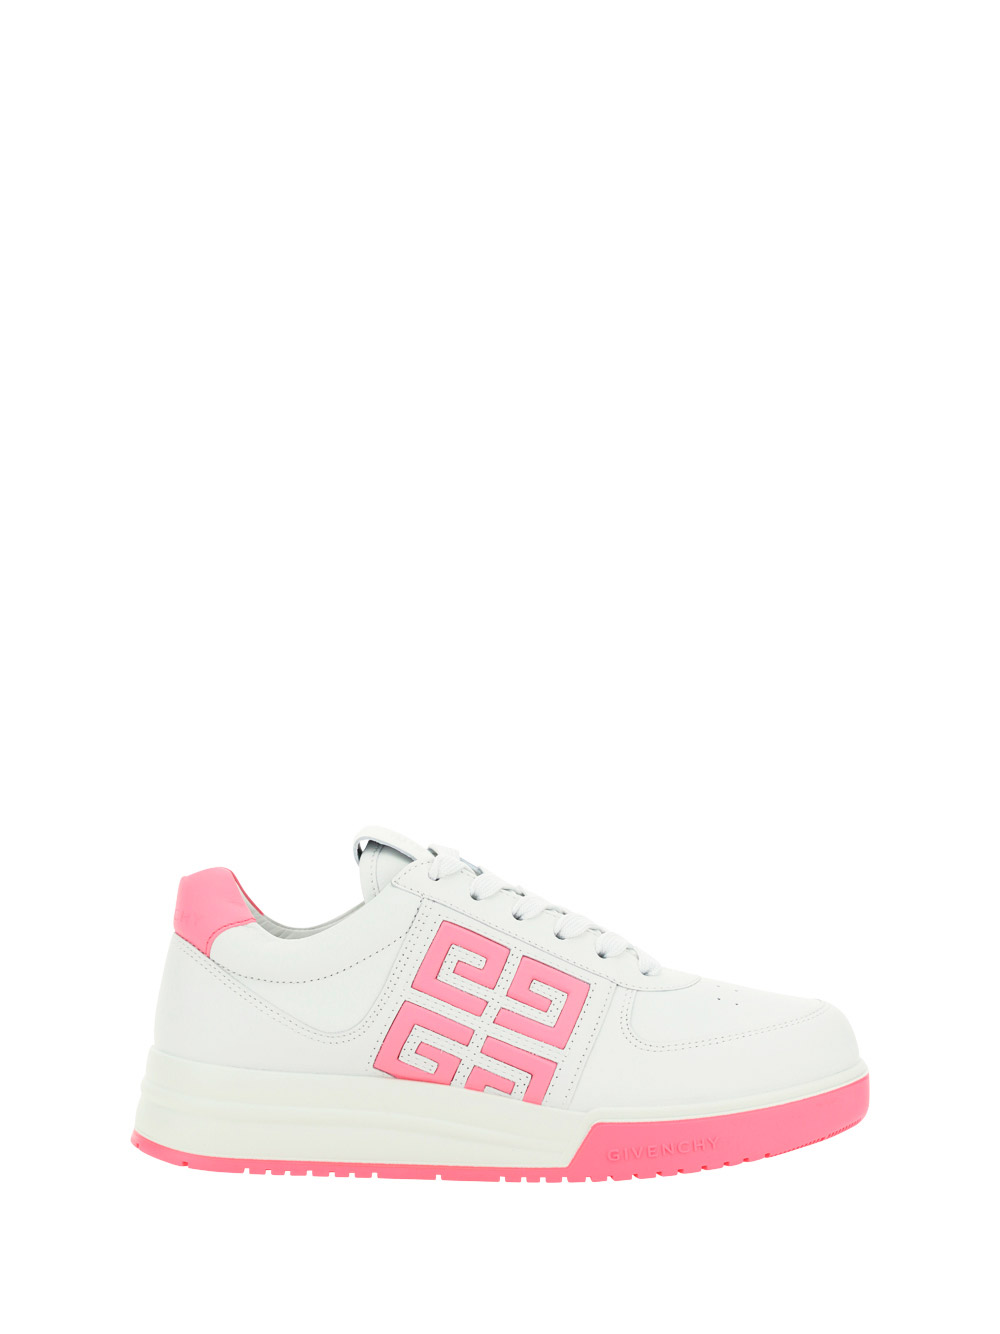 Givenchy G4 Lace-up Sneakers In Multicolor